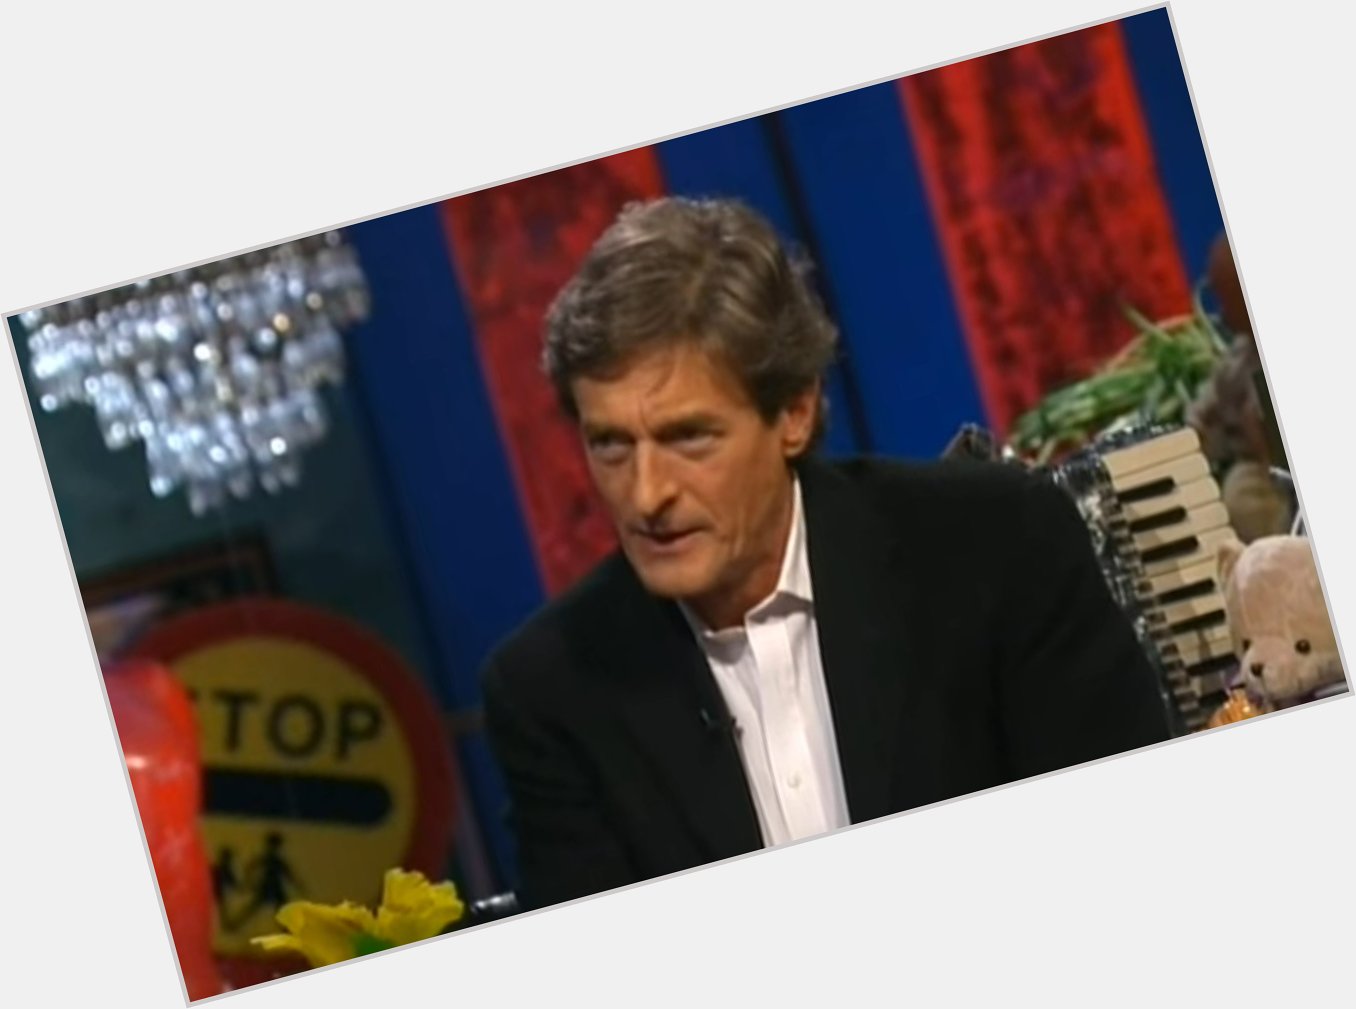 A Happy Birthday to Nigel Havers who is celebrating his 71st birthday, today. 